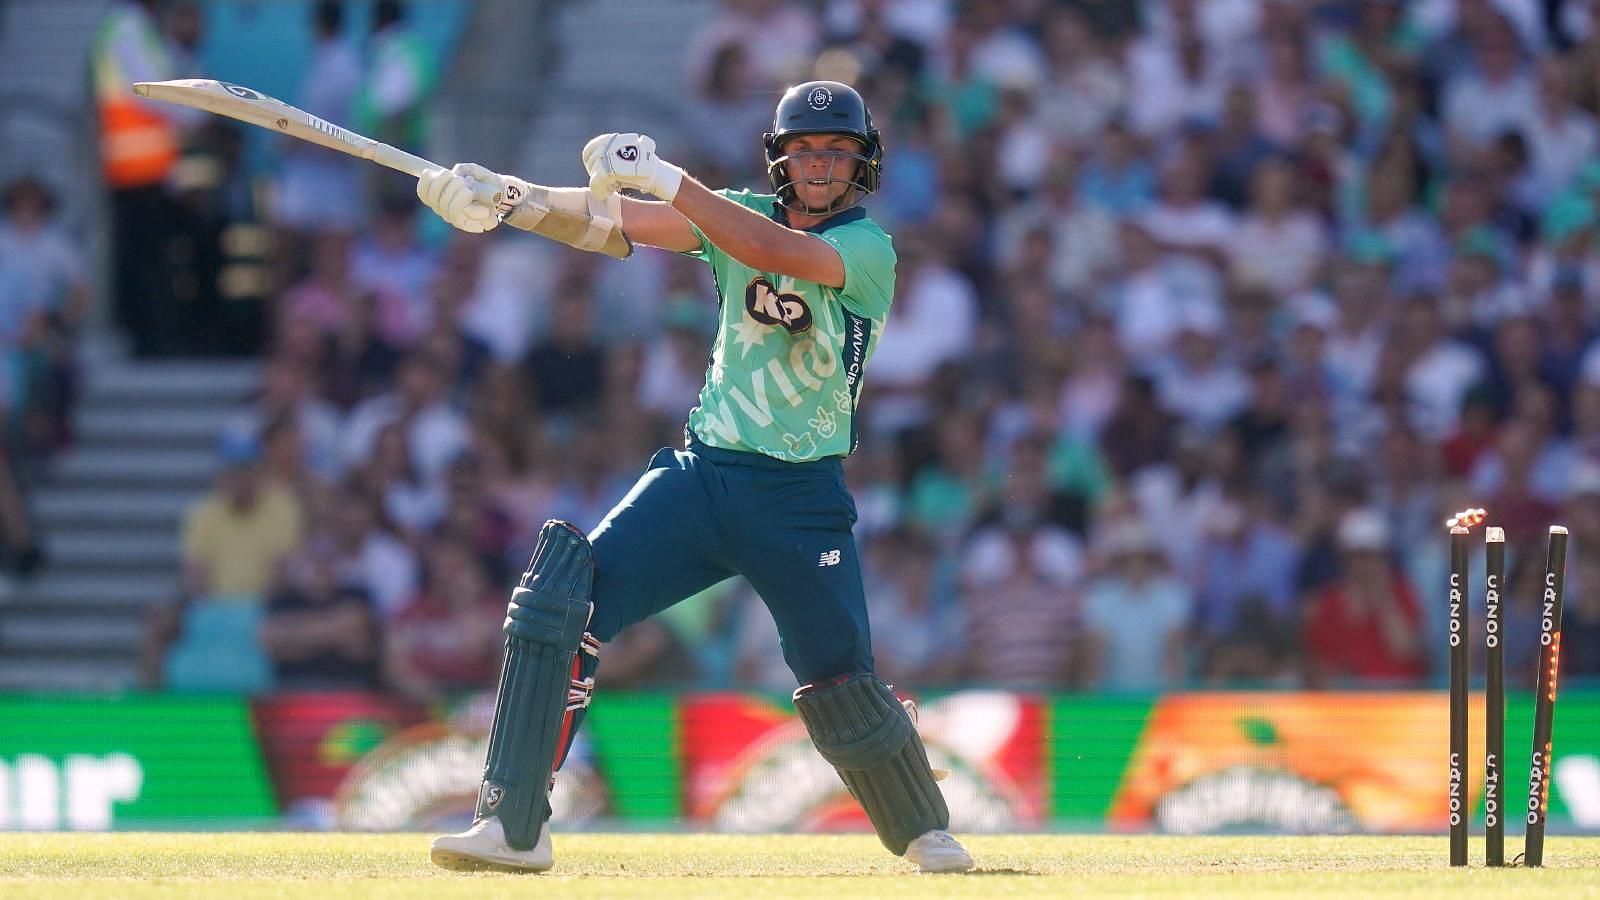 Sam Curran played a crucial role in the Invincibles